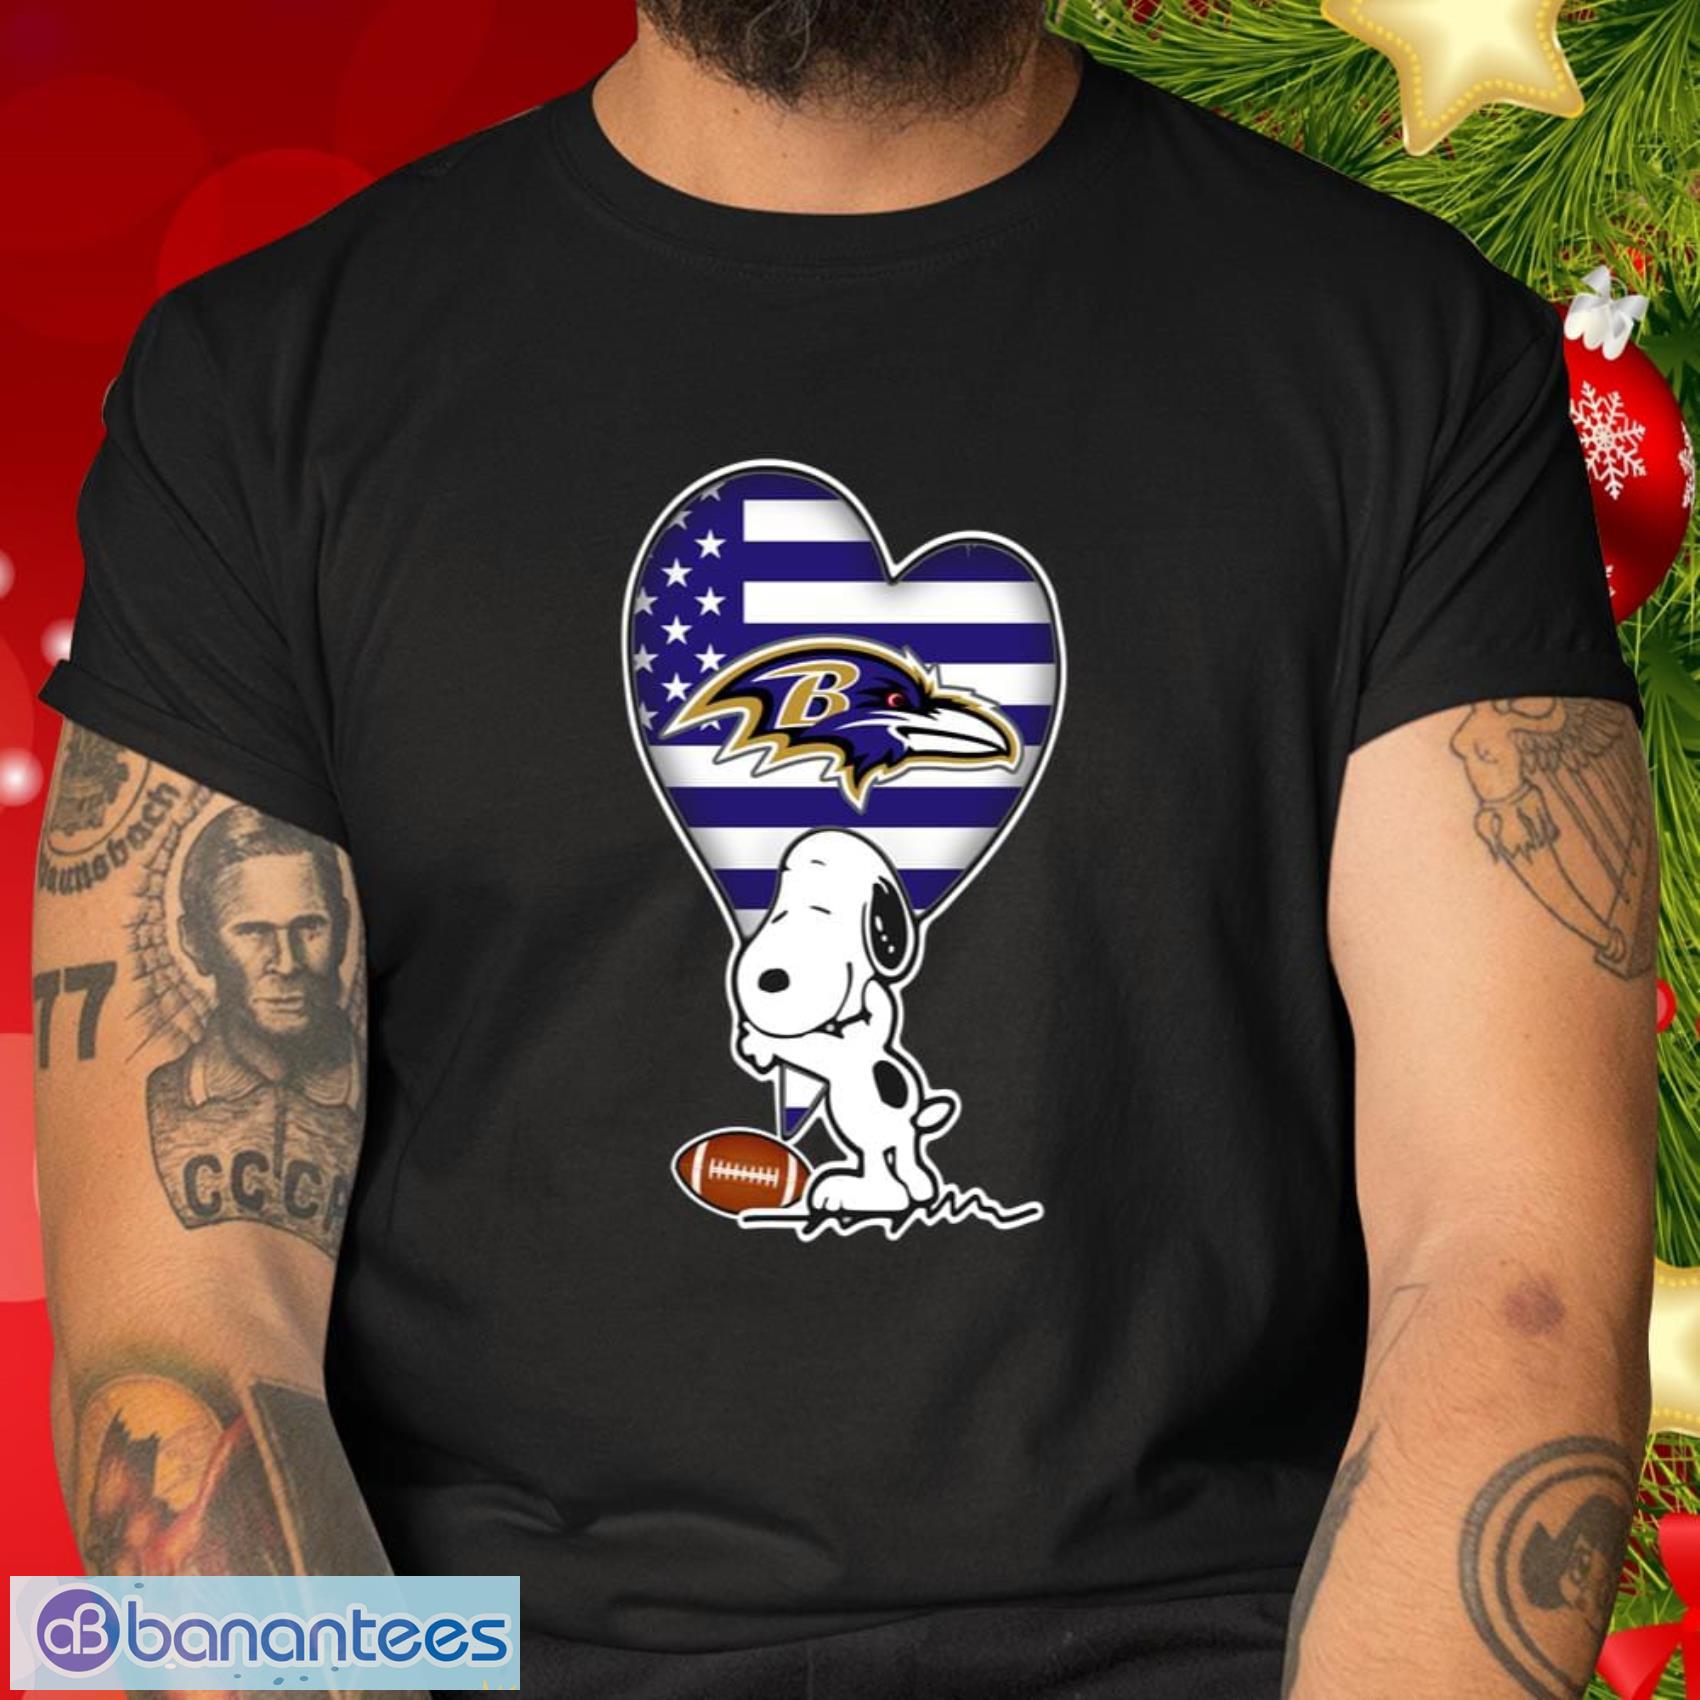 Baltimore Ravens NFL Football Gift Fr Fans The Peanuts Movie Adorable Snoopy T Shirt - Baltimore Ravens NFL Football The Peanuts Movie Adorable Snoopy T Shirt_2